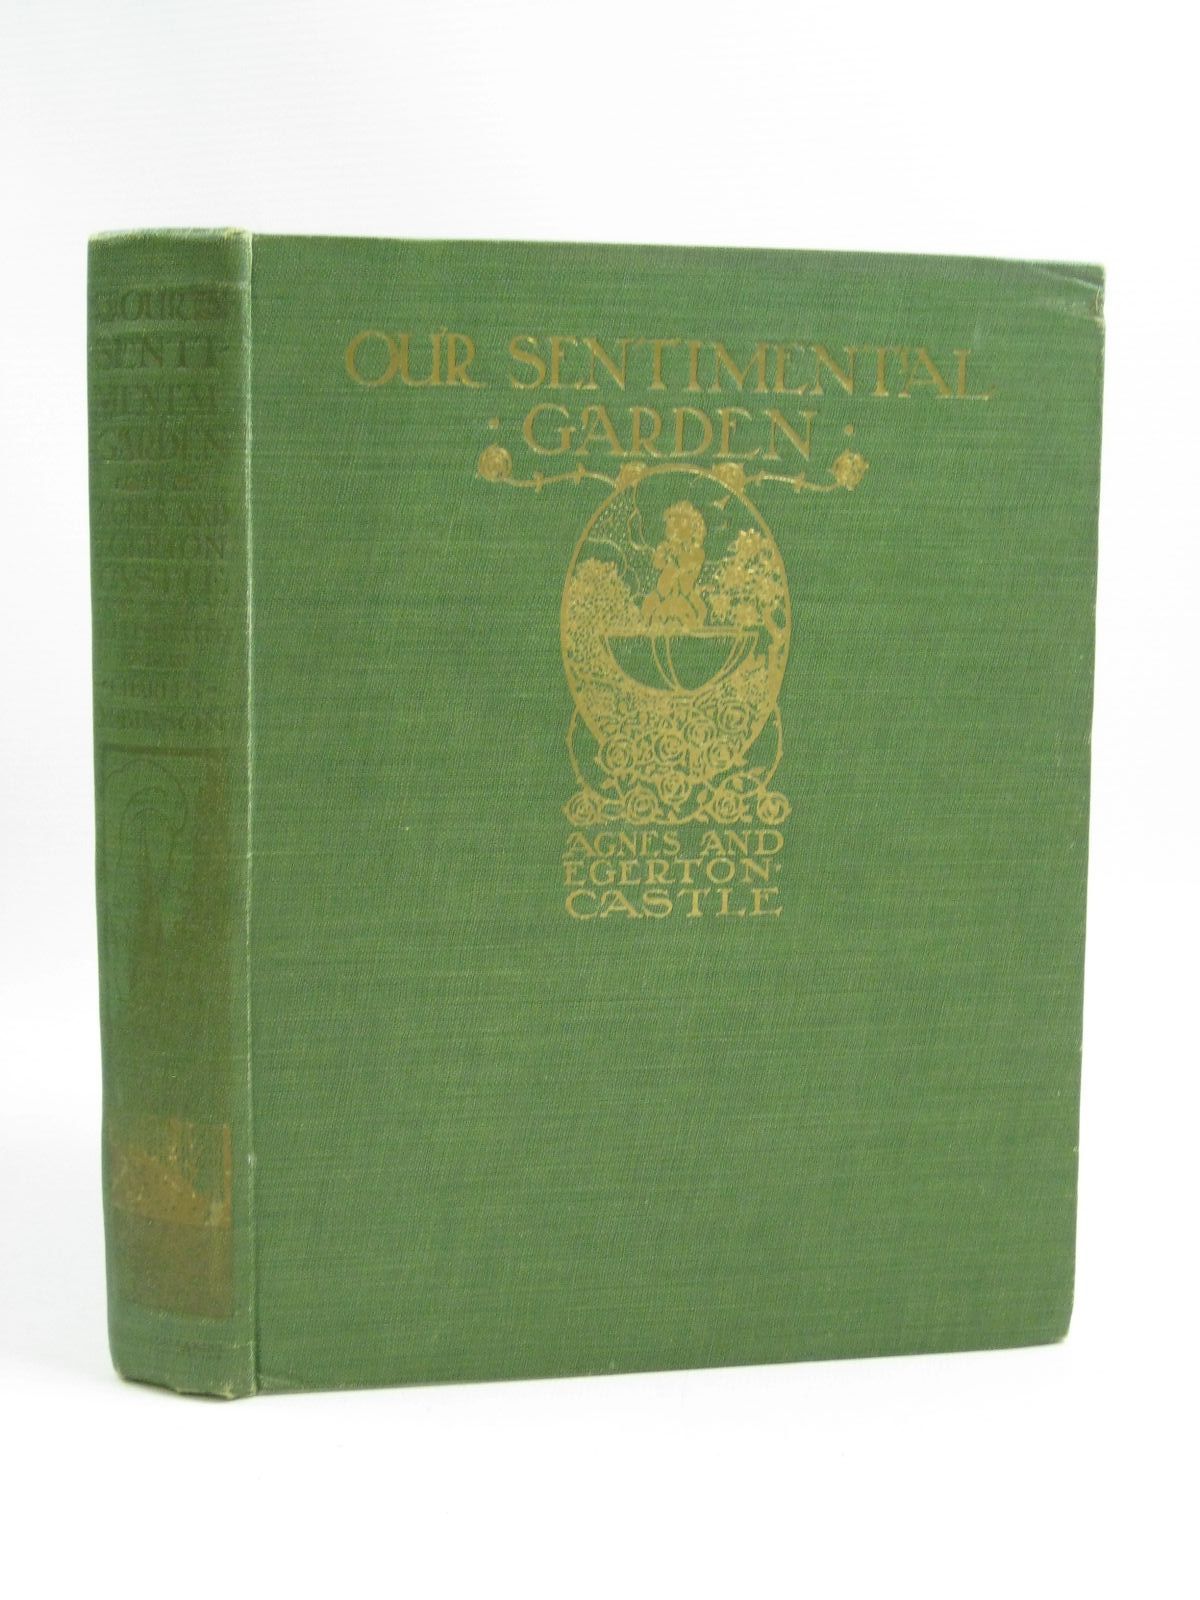 Photo of OUR SENTIMENTAL GARDEN written by Castle, Agnes
Castle, Egerton illustrated by Robinson, Charles published by William Heinemann (STOCK CODE: 1505352)  for sale by Stella & Rose's Books